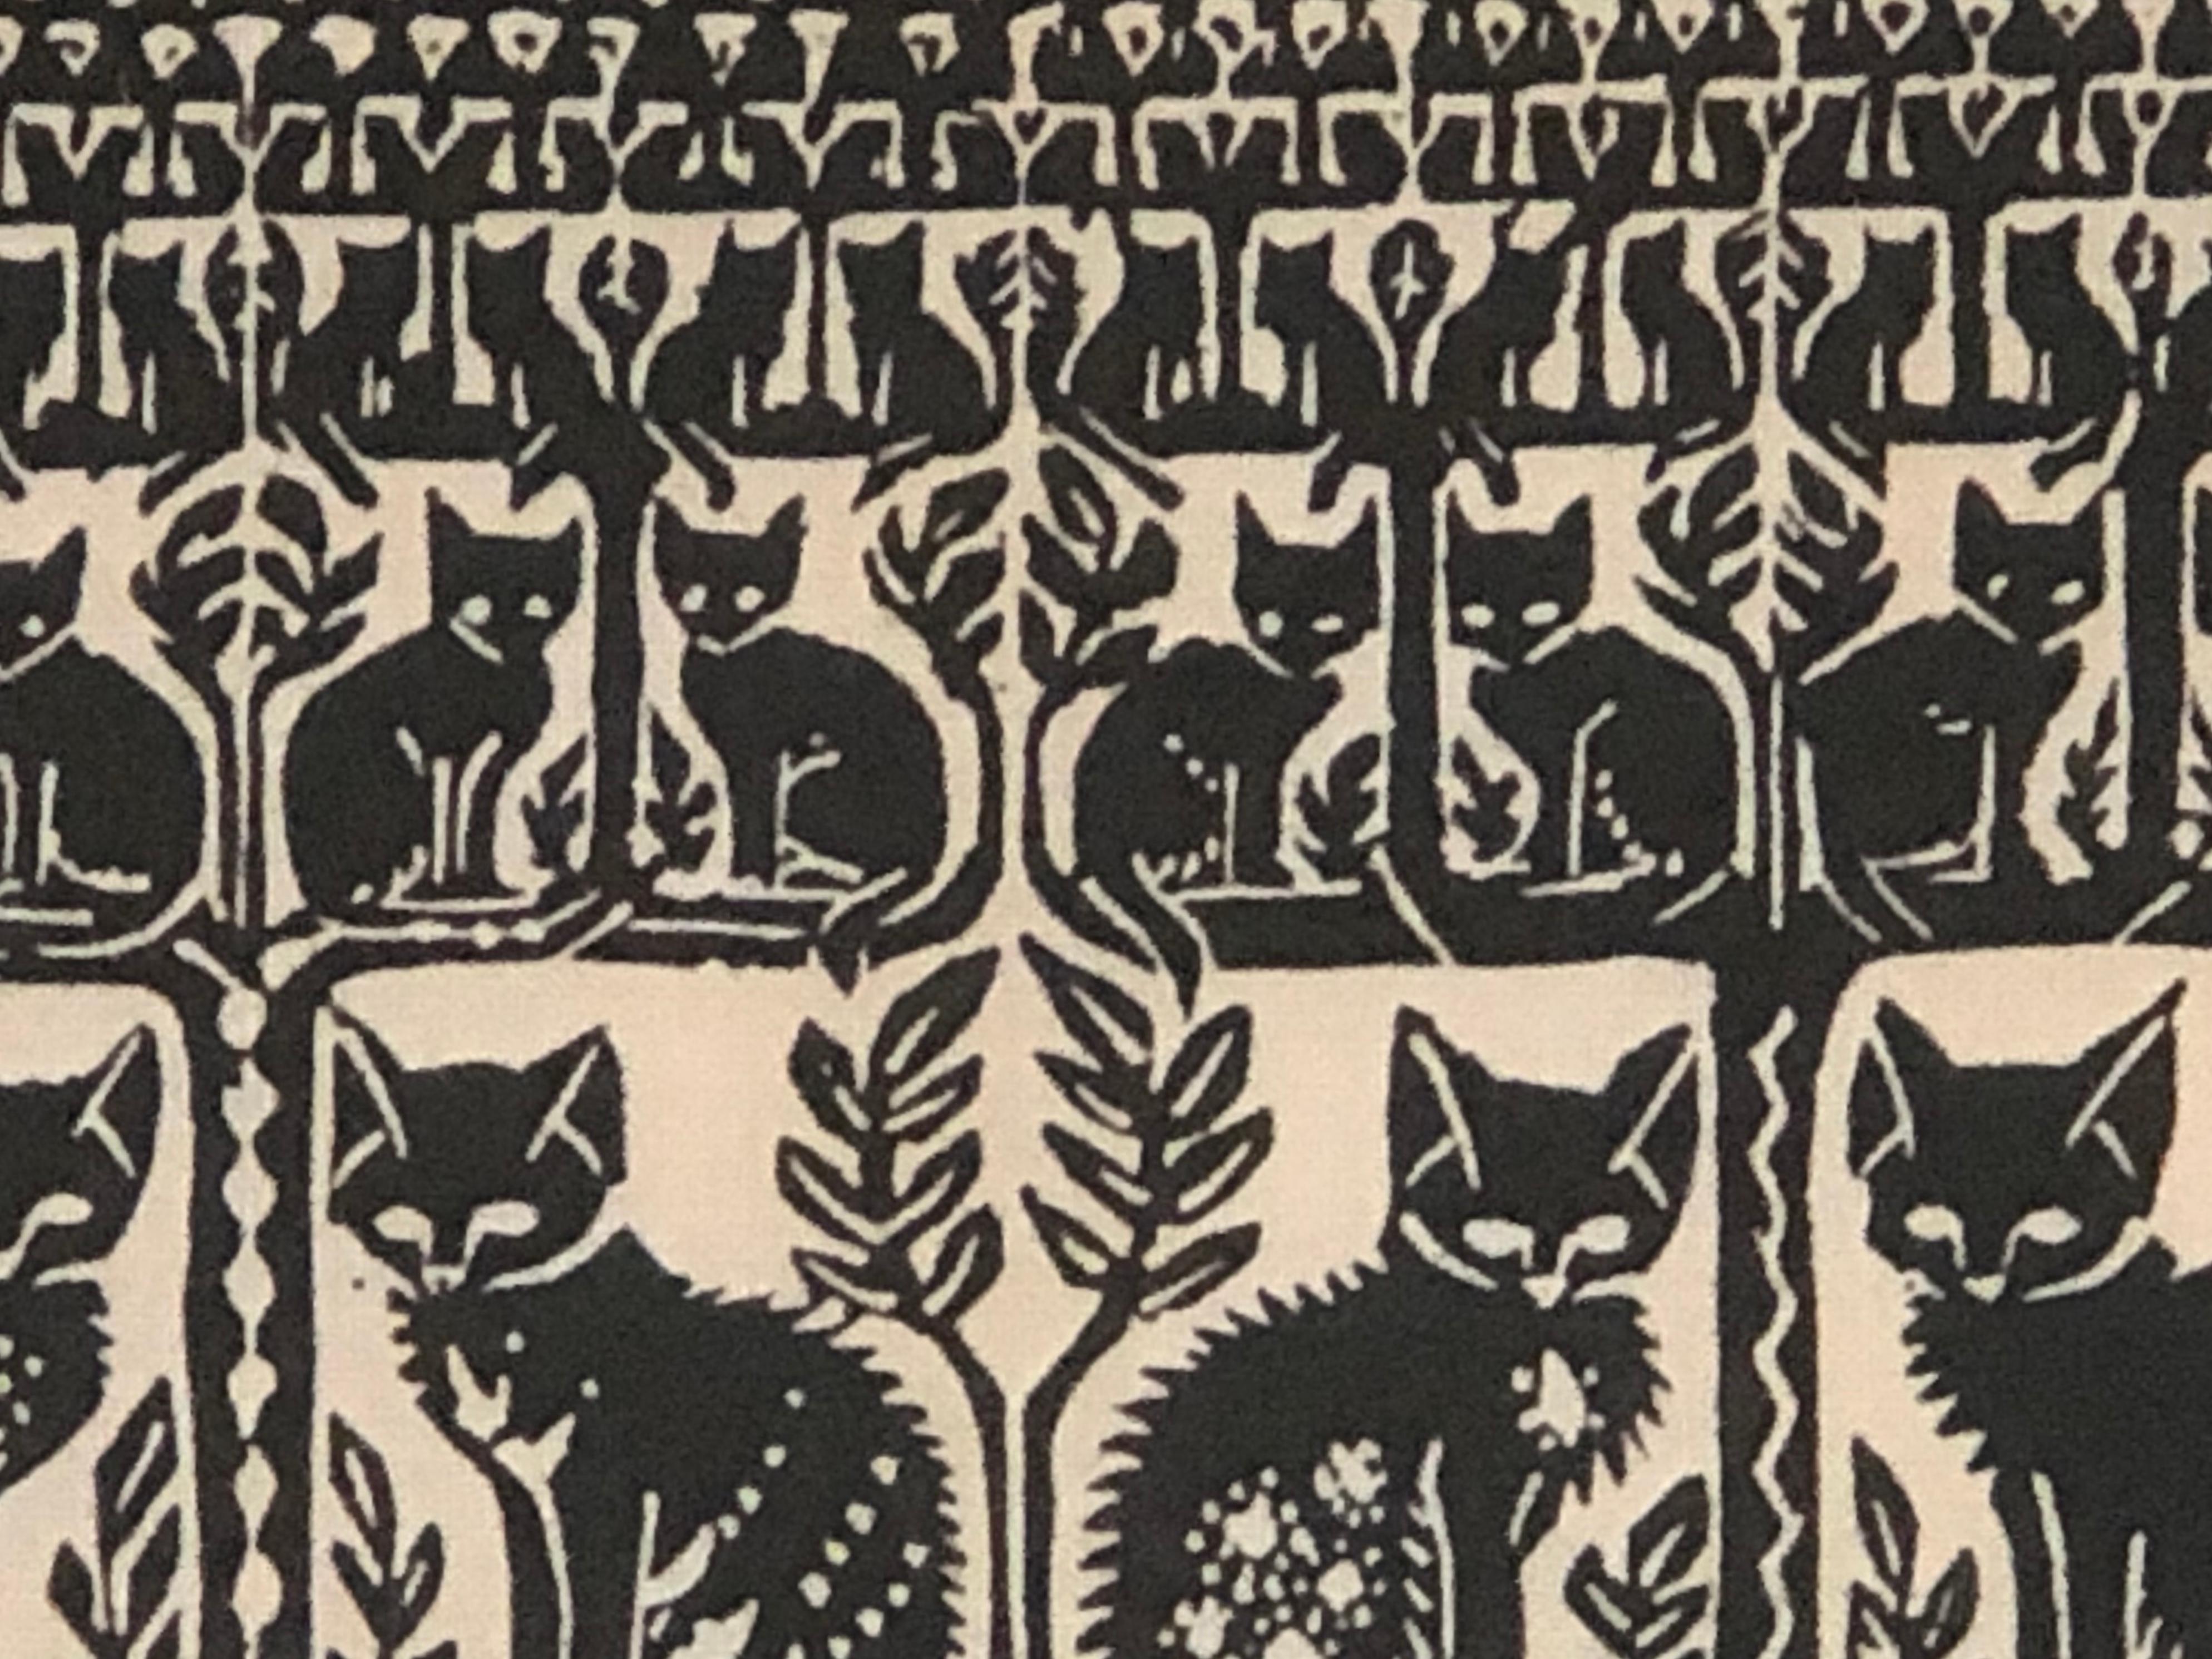 Folly Cove Designers Cat and Kitten Themed Hand Block Print 3